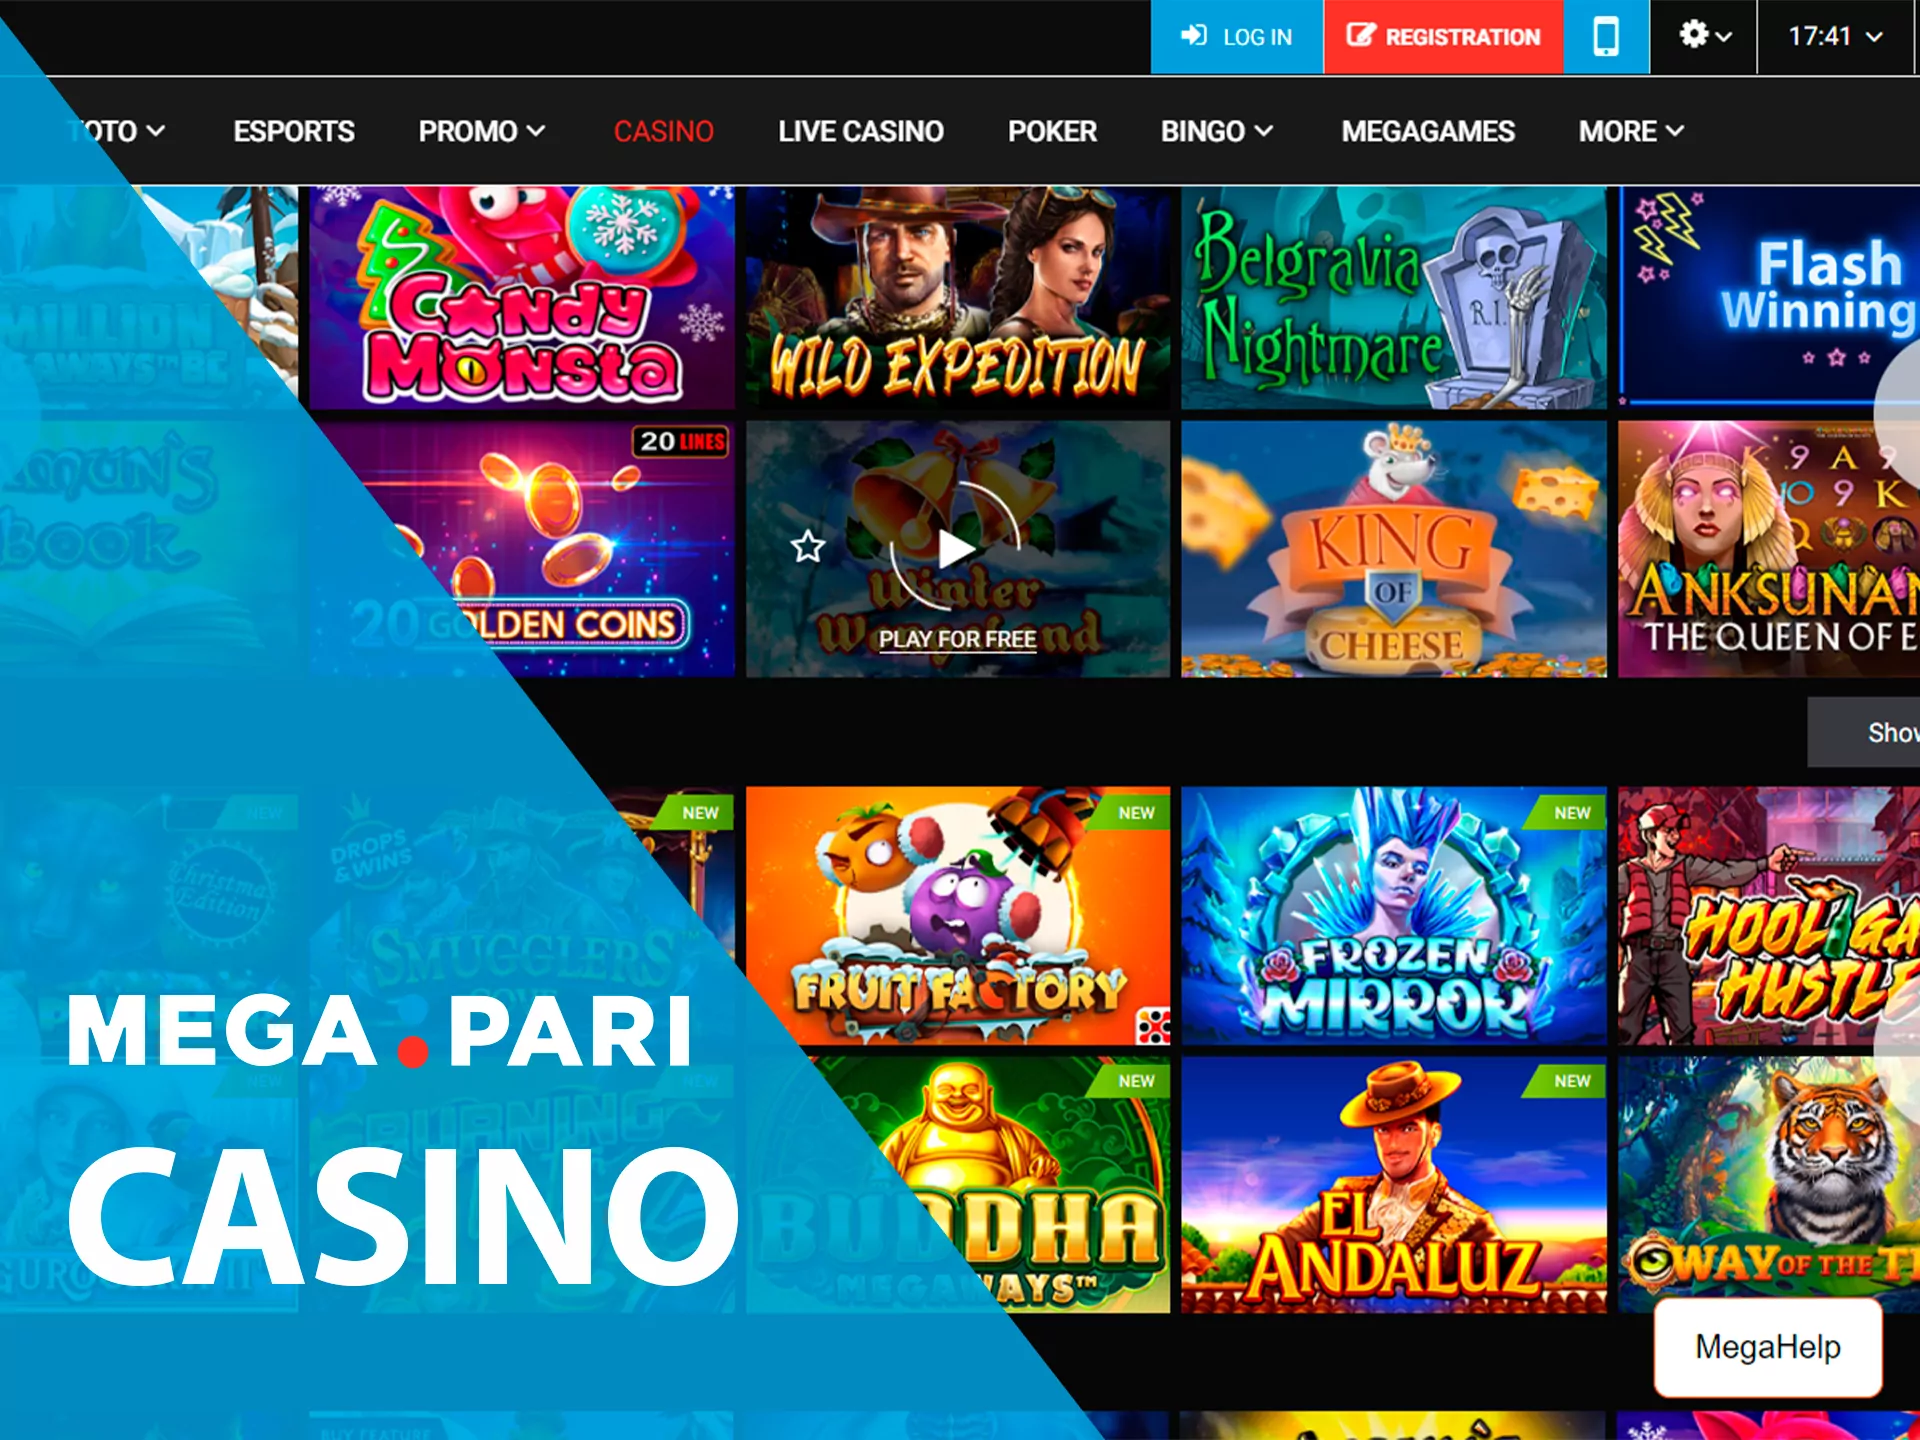 Play your favorite slots in the MegaPari online casino.